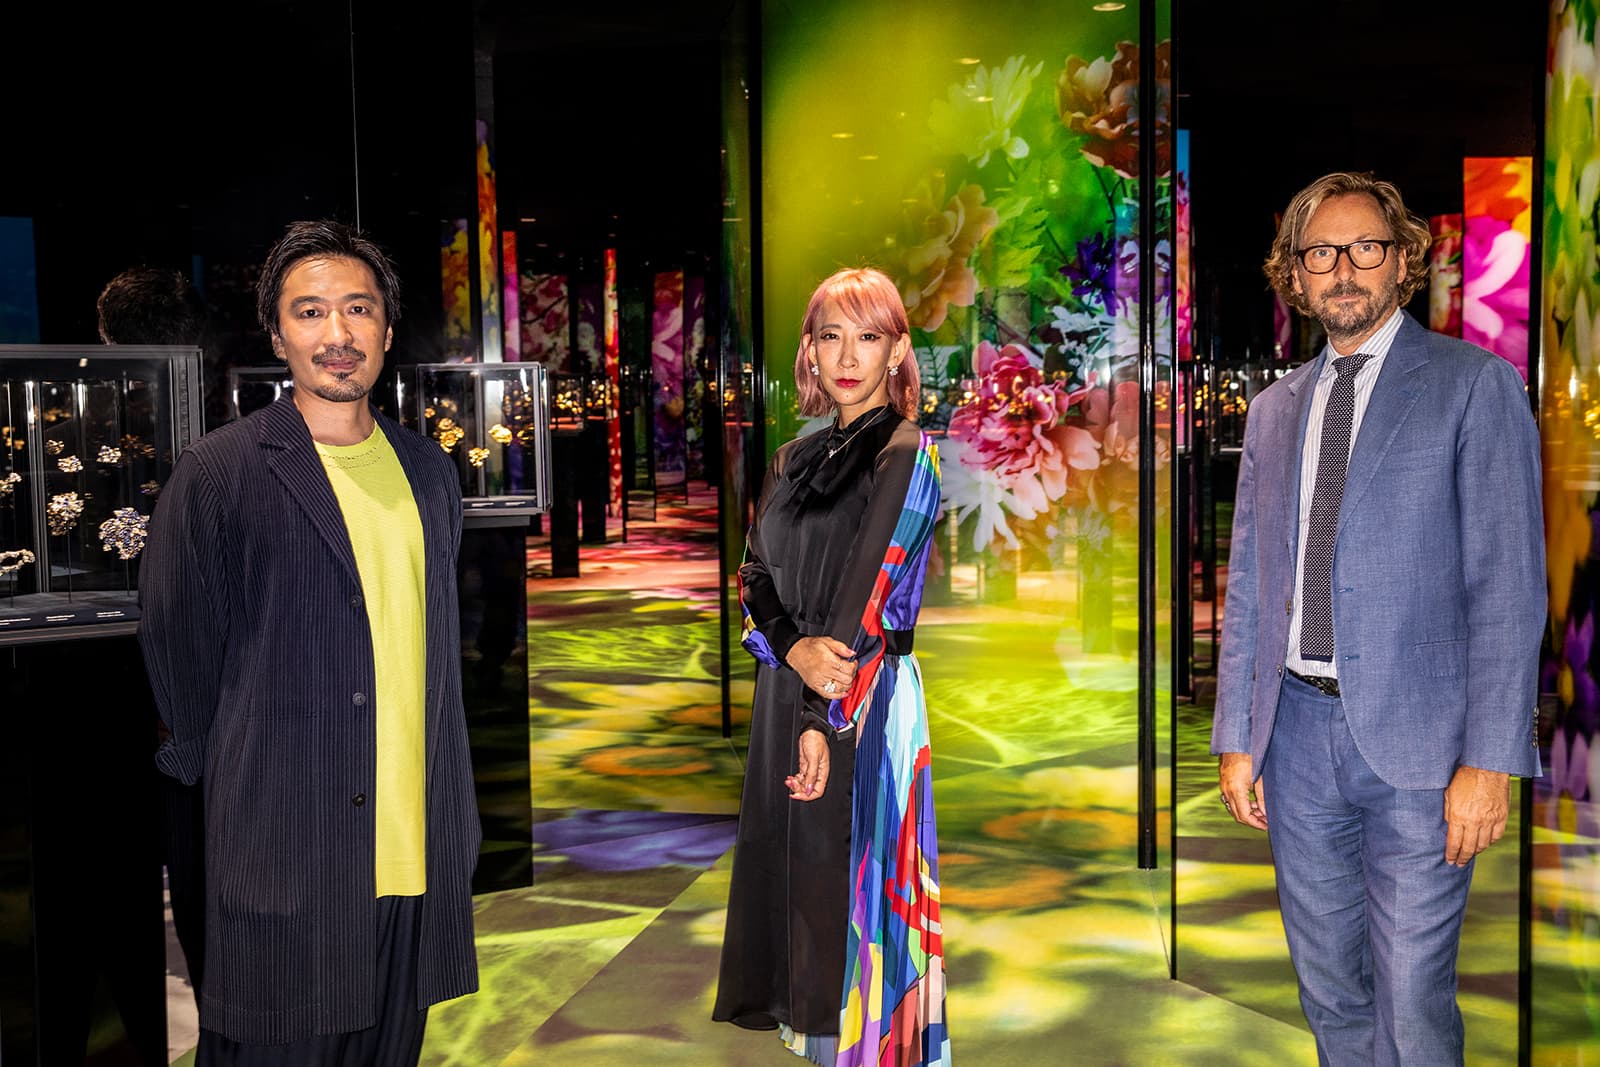 Tsuyoshi Tane, Mika Ninagawa and Nicolas Bos pose for a photograph at the Florae exhibition of Van Cleef & Arpels jewellery